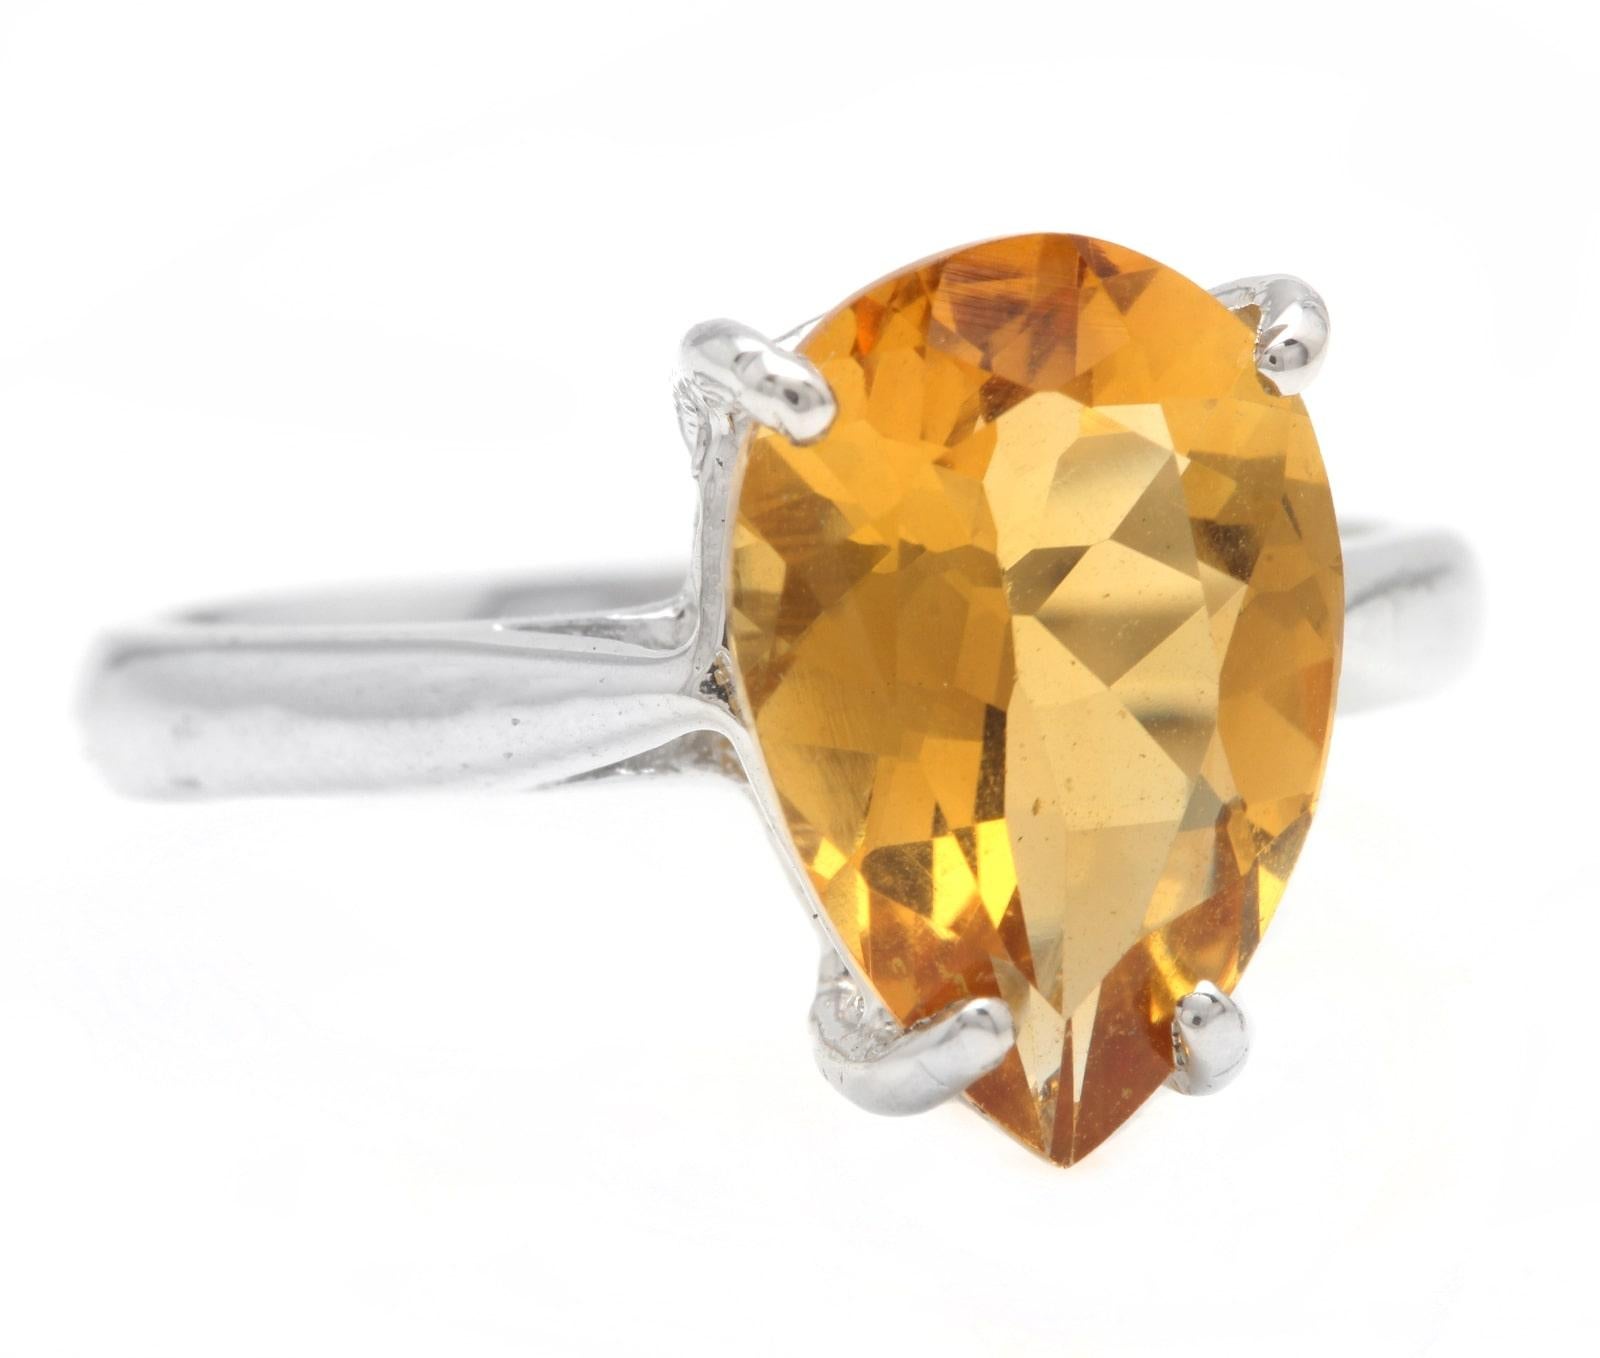 2.50 Carats Exquisite Natural Citrine 14K Solid White Gold Ring

Total Natural Citrine Weight is: Approx. 2.50 Carats 

Citrine Measures: Approx. 12.00 x 8.00mm

Ring size: 5.75 ( Free Sizing available)

Ring total weight: Approx. 3.0